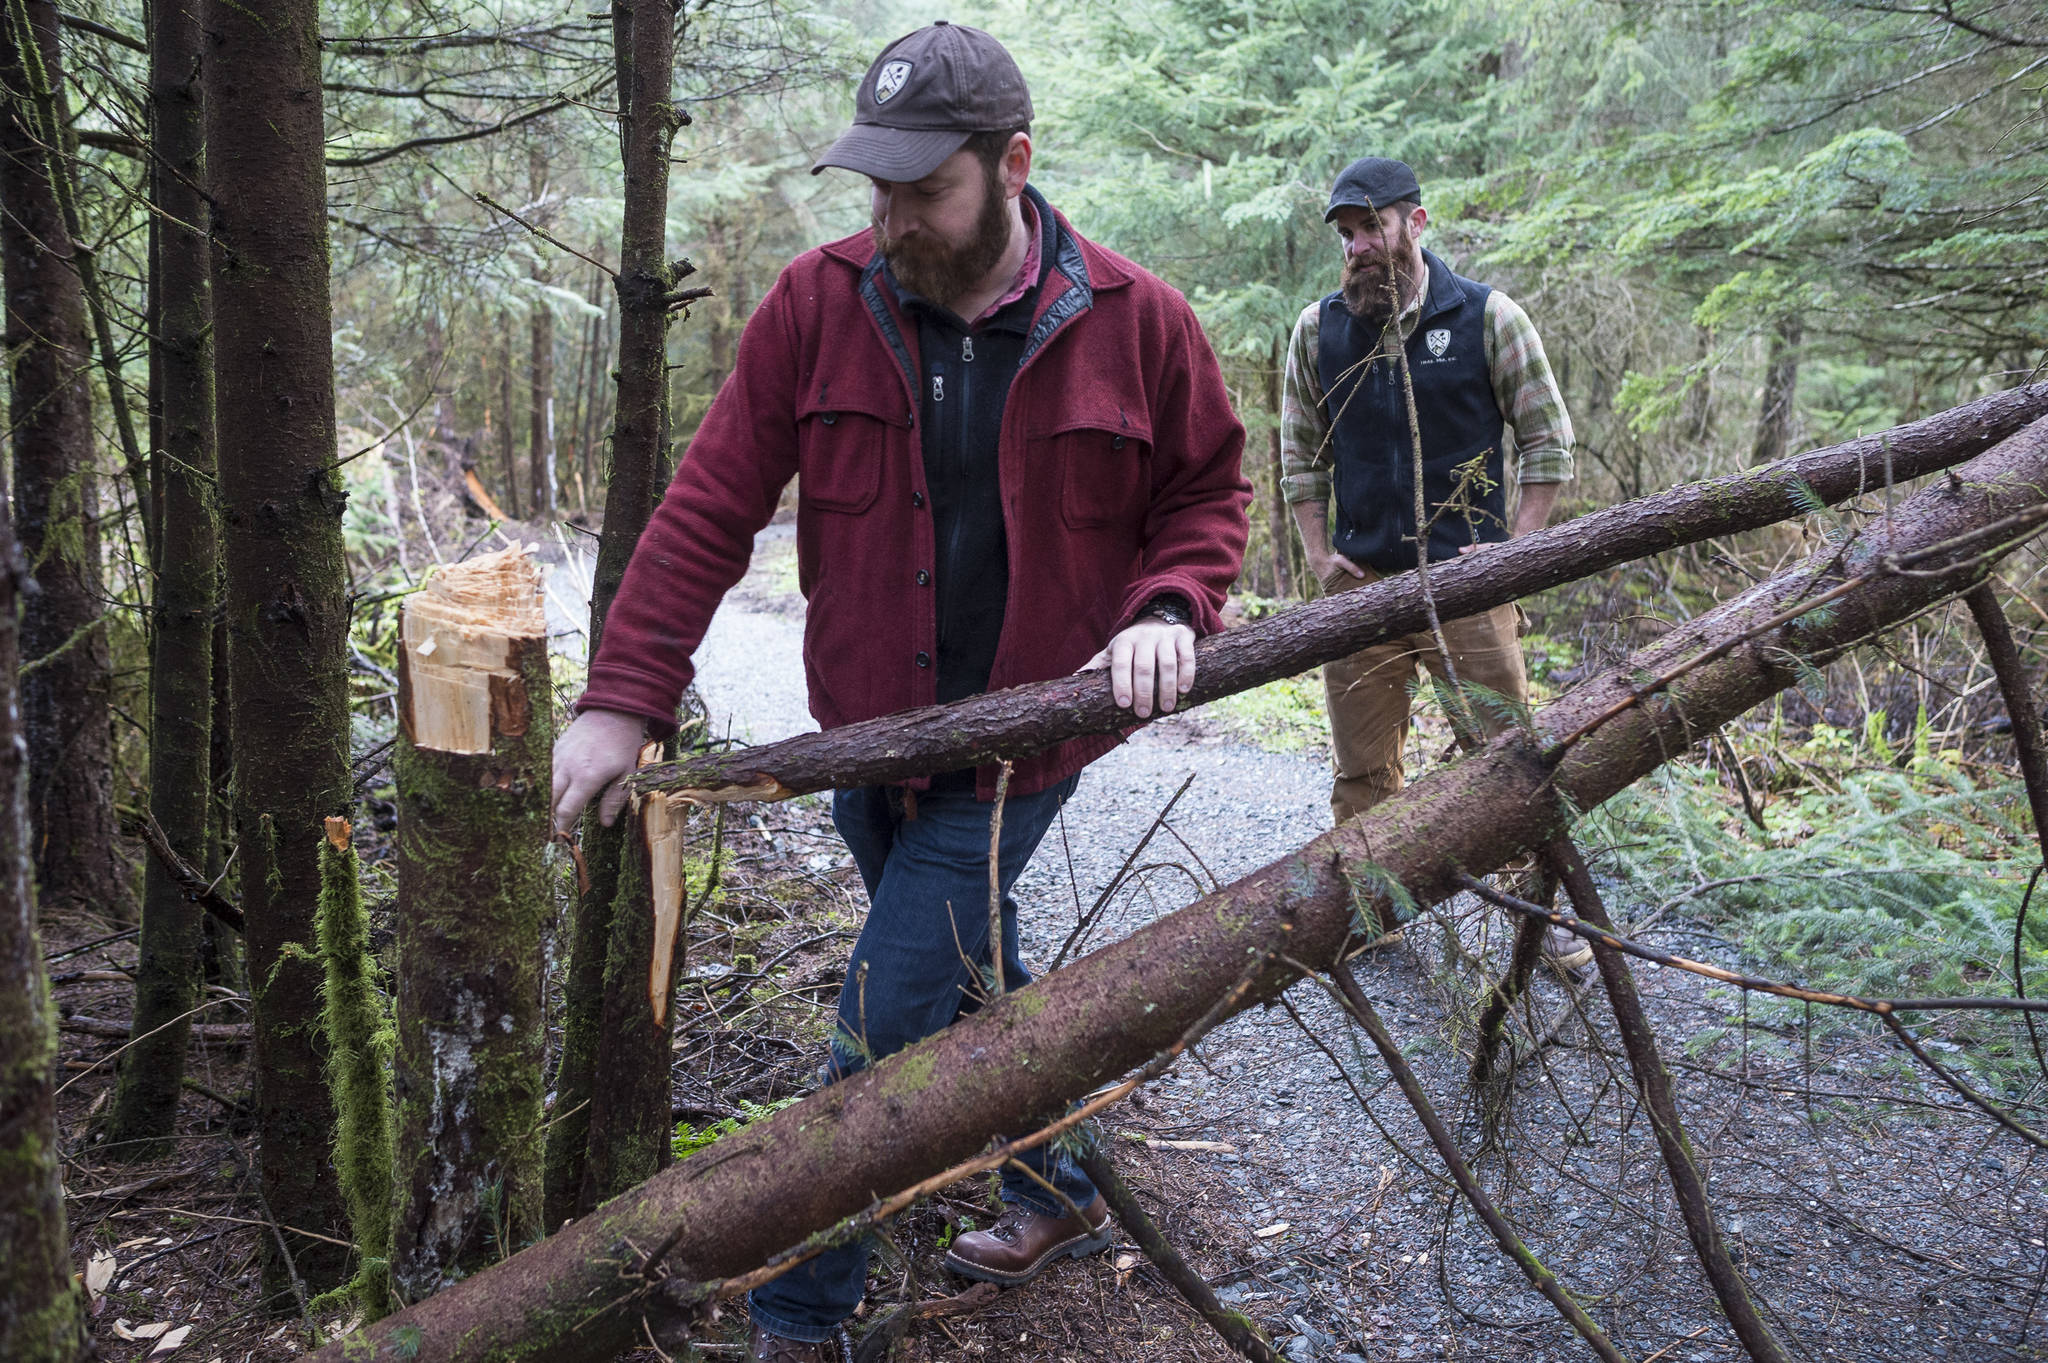 Erik Boraas, executive director of Trail Mix, Inc., left, and Ryan O’Shaughnessy come along vandalism along the newly reworked Davis Meadows Trail in Switzer Creek on Monday, Nov. 12, 2018. (Michael Penn | Juneau Empire File)